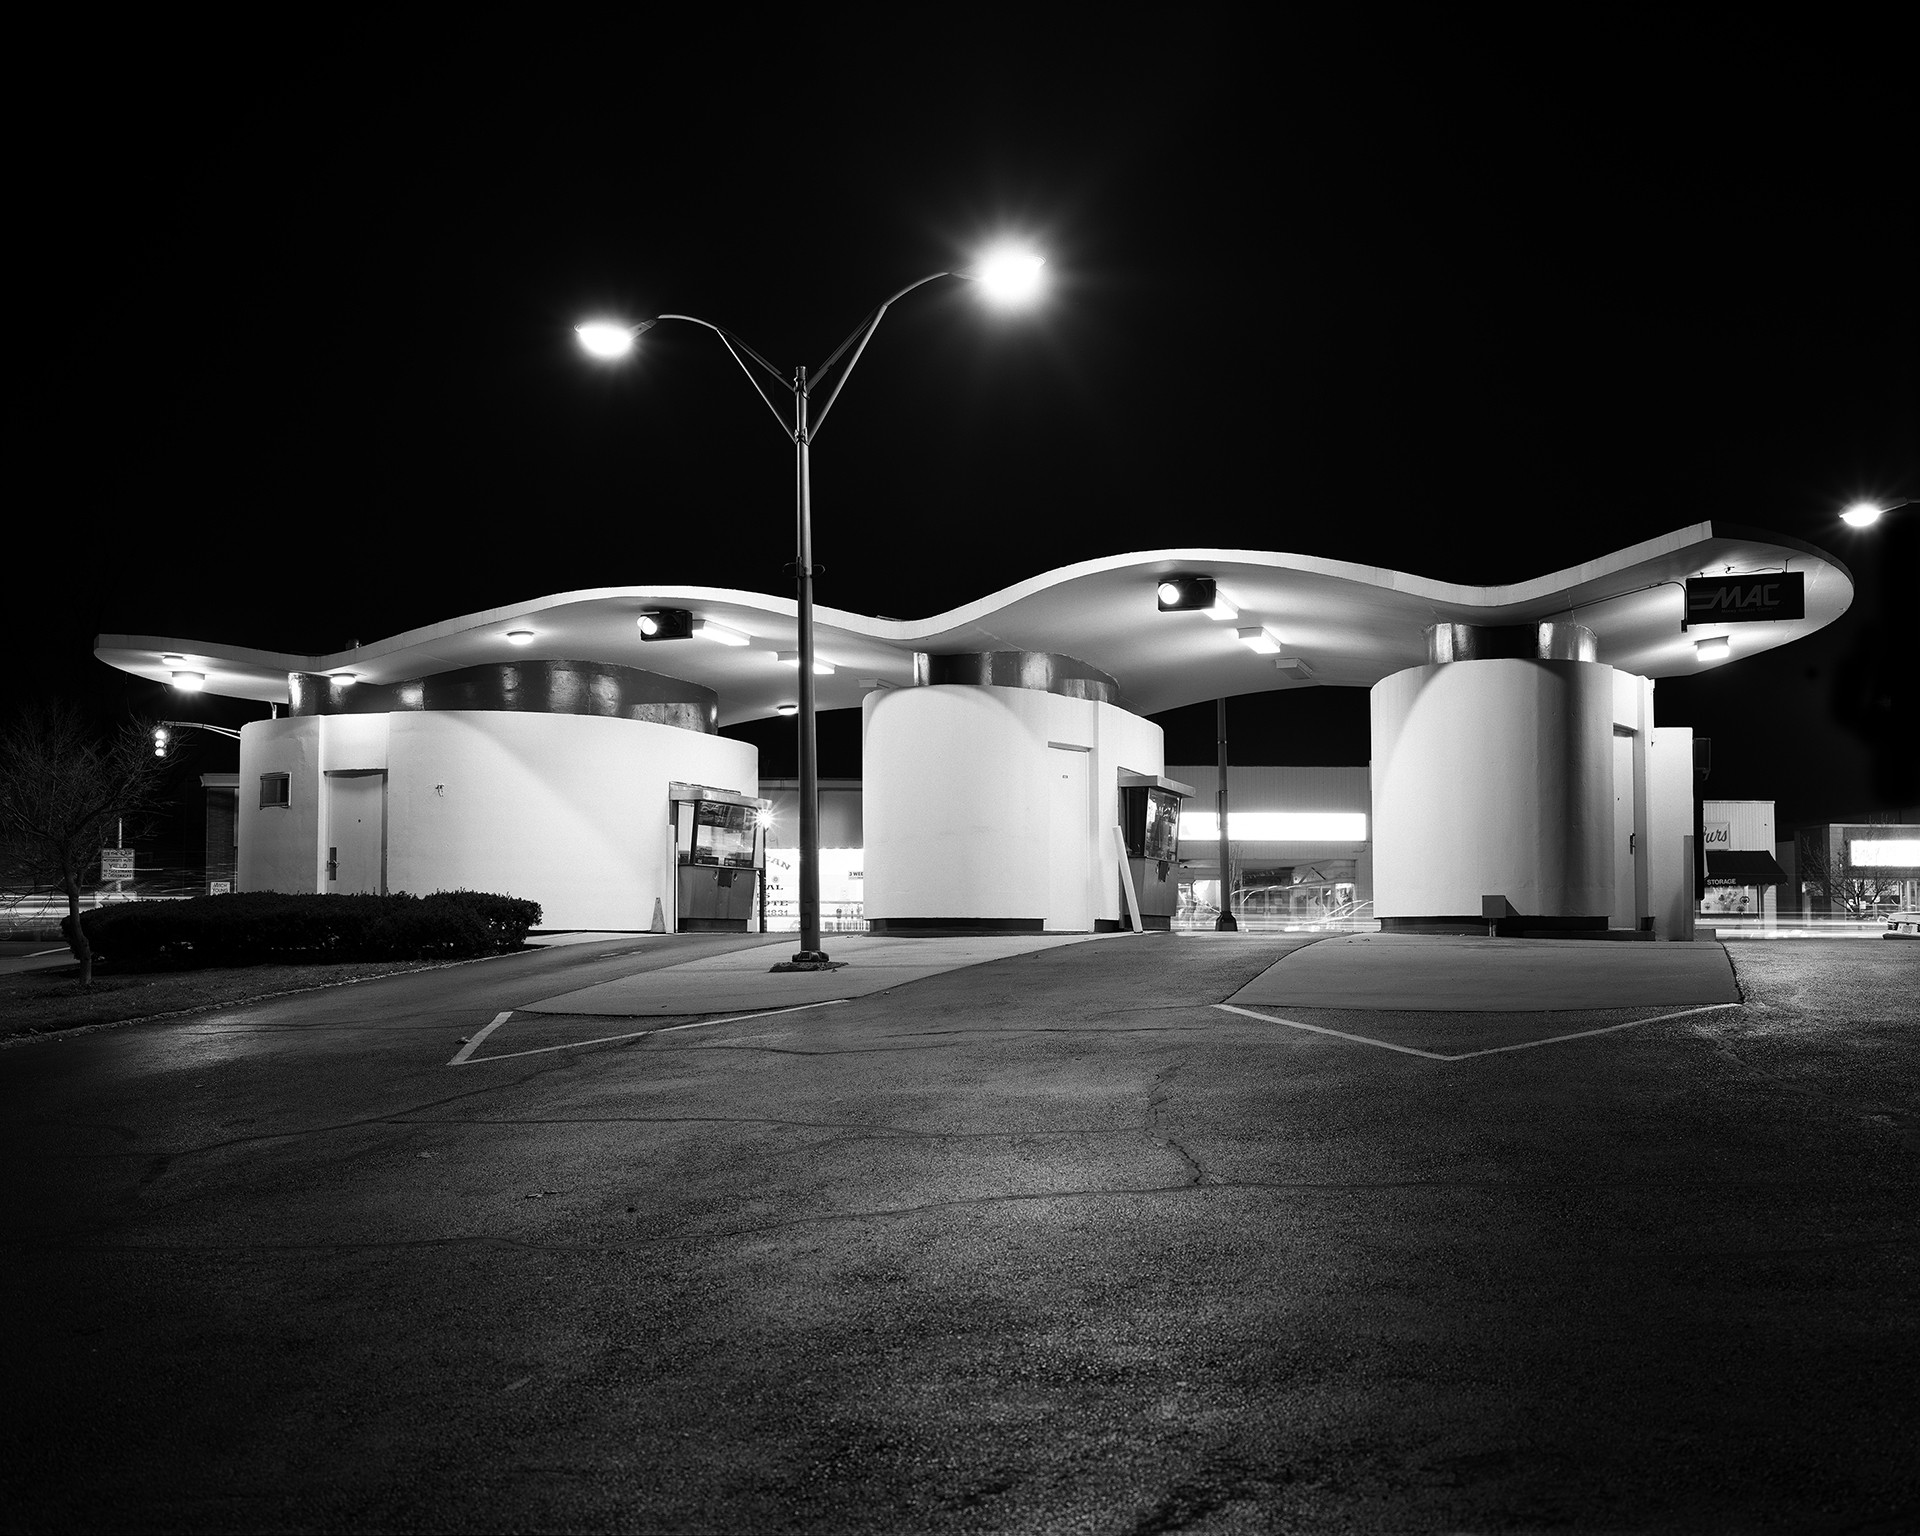 Photos of a bank drive-in at night, taken by the american photographer George Tice.